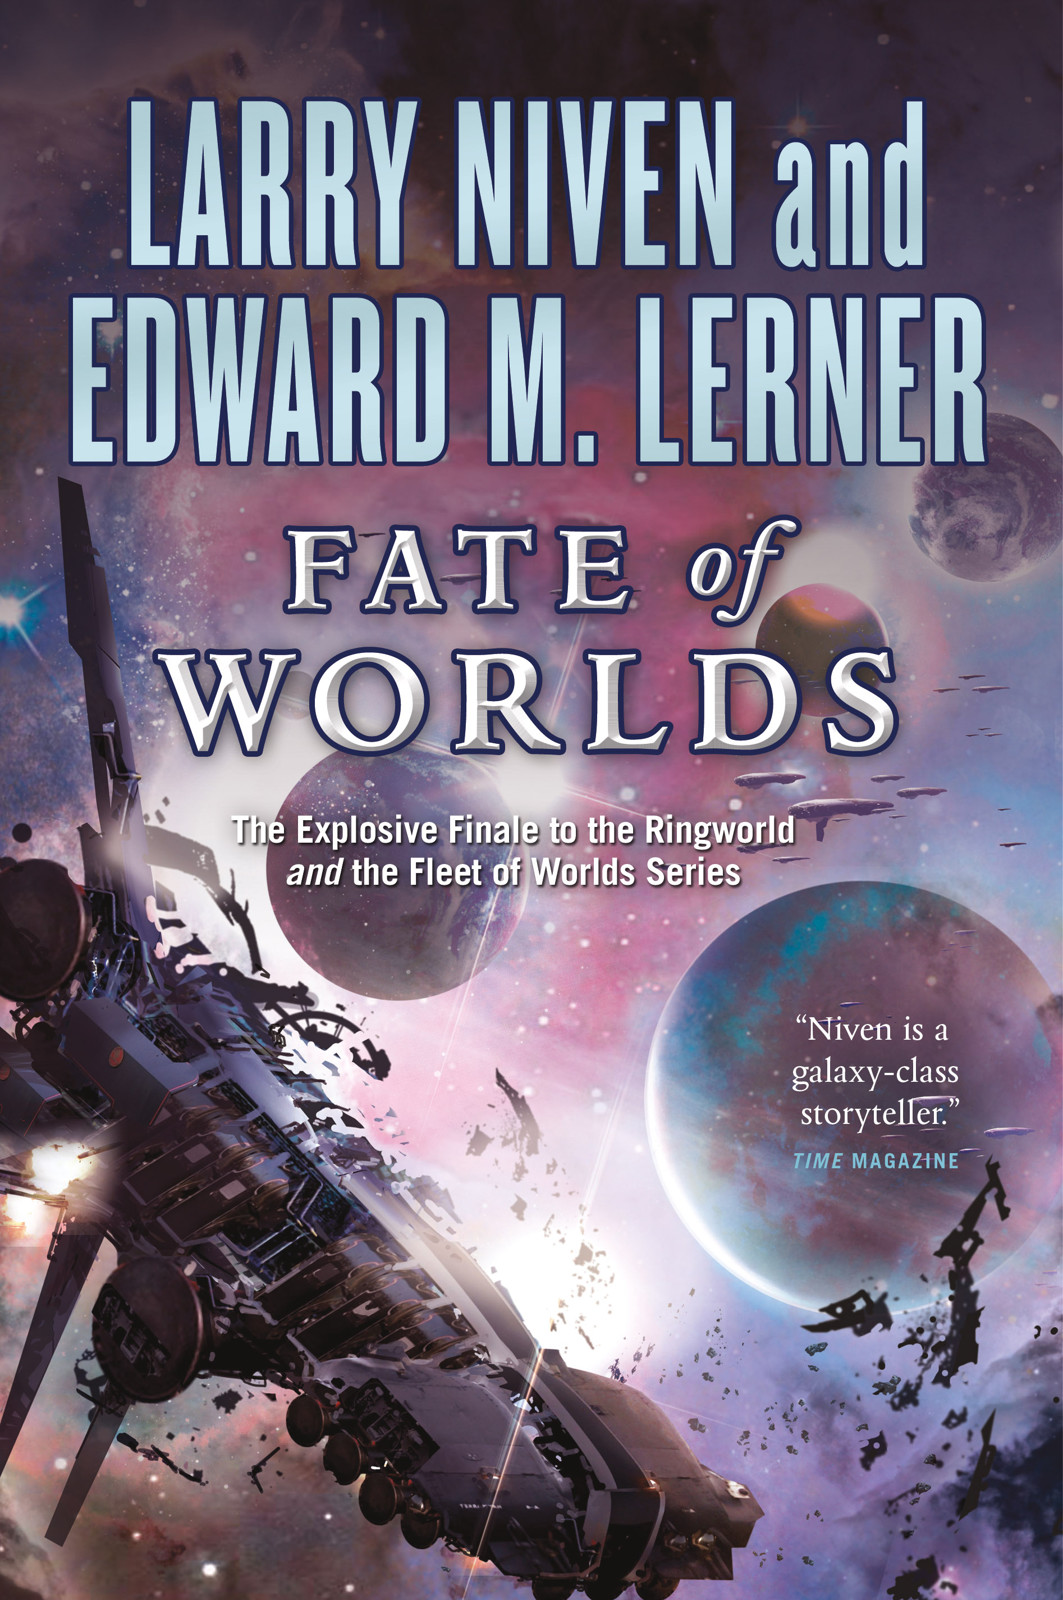 Fate of Worlds (2012, Tor)